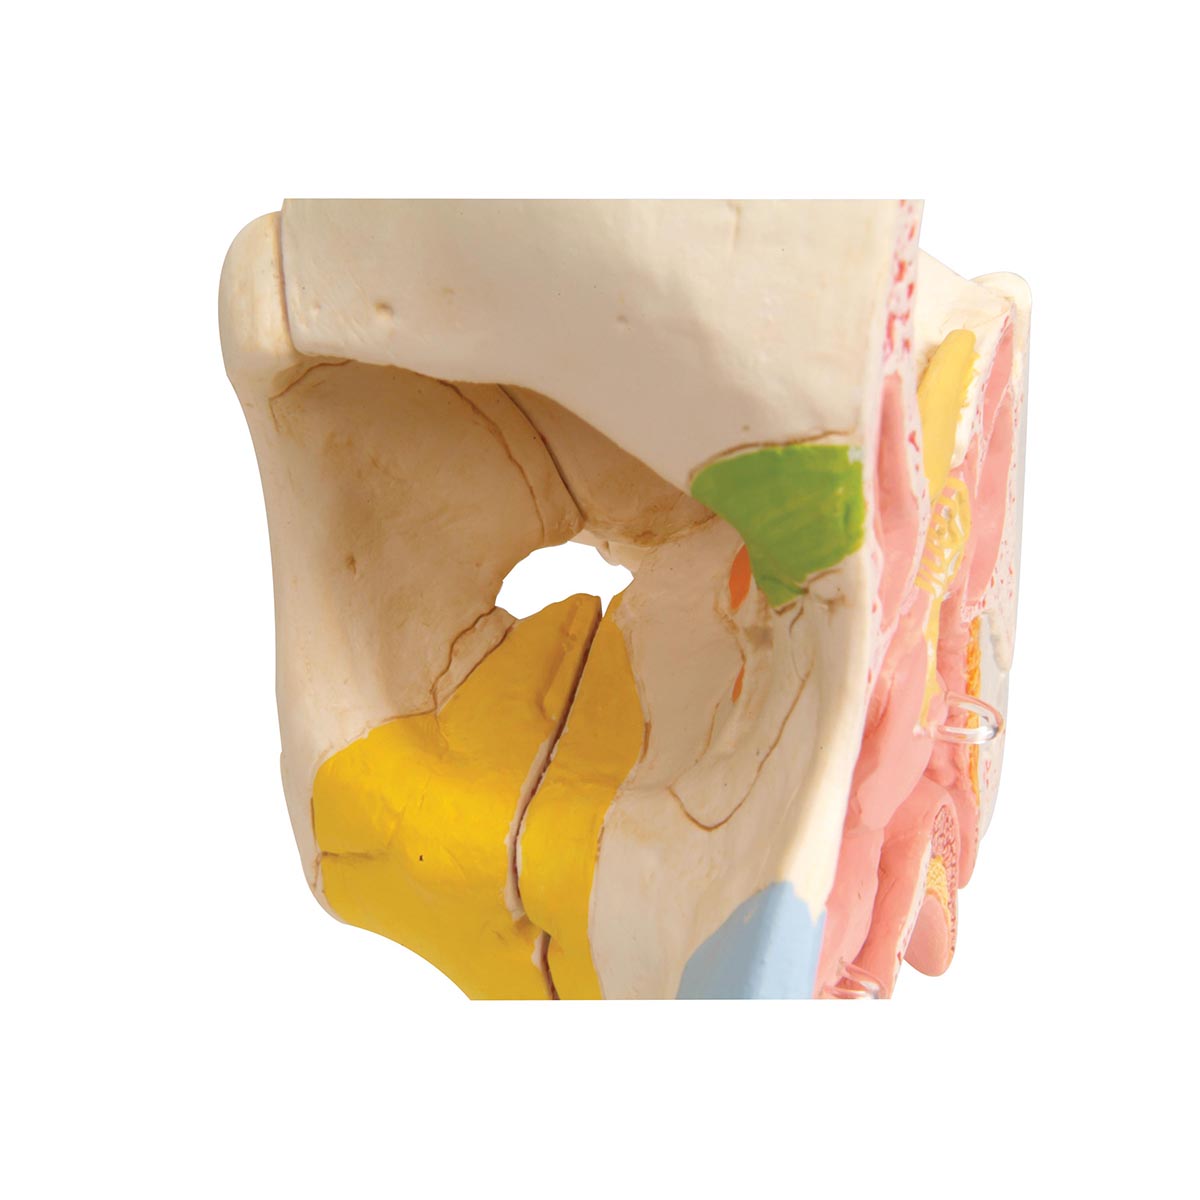 Enlarged and detailed model of the location of the 4 sinuses and much more. Can be separated into several parts